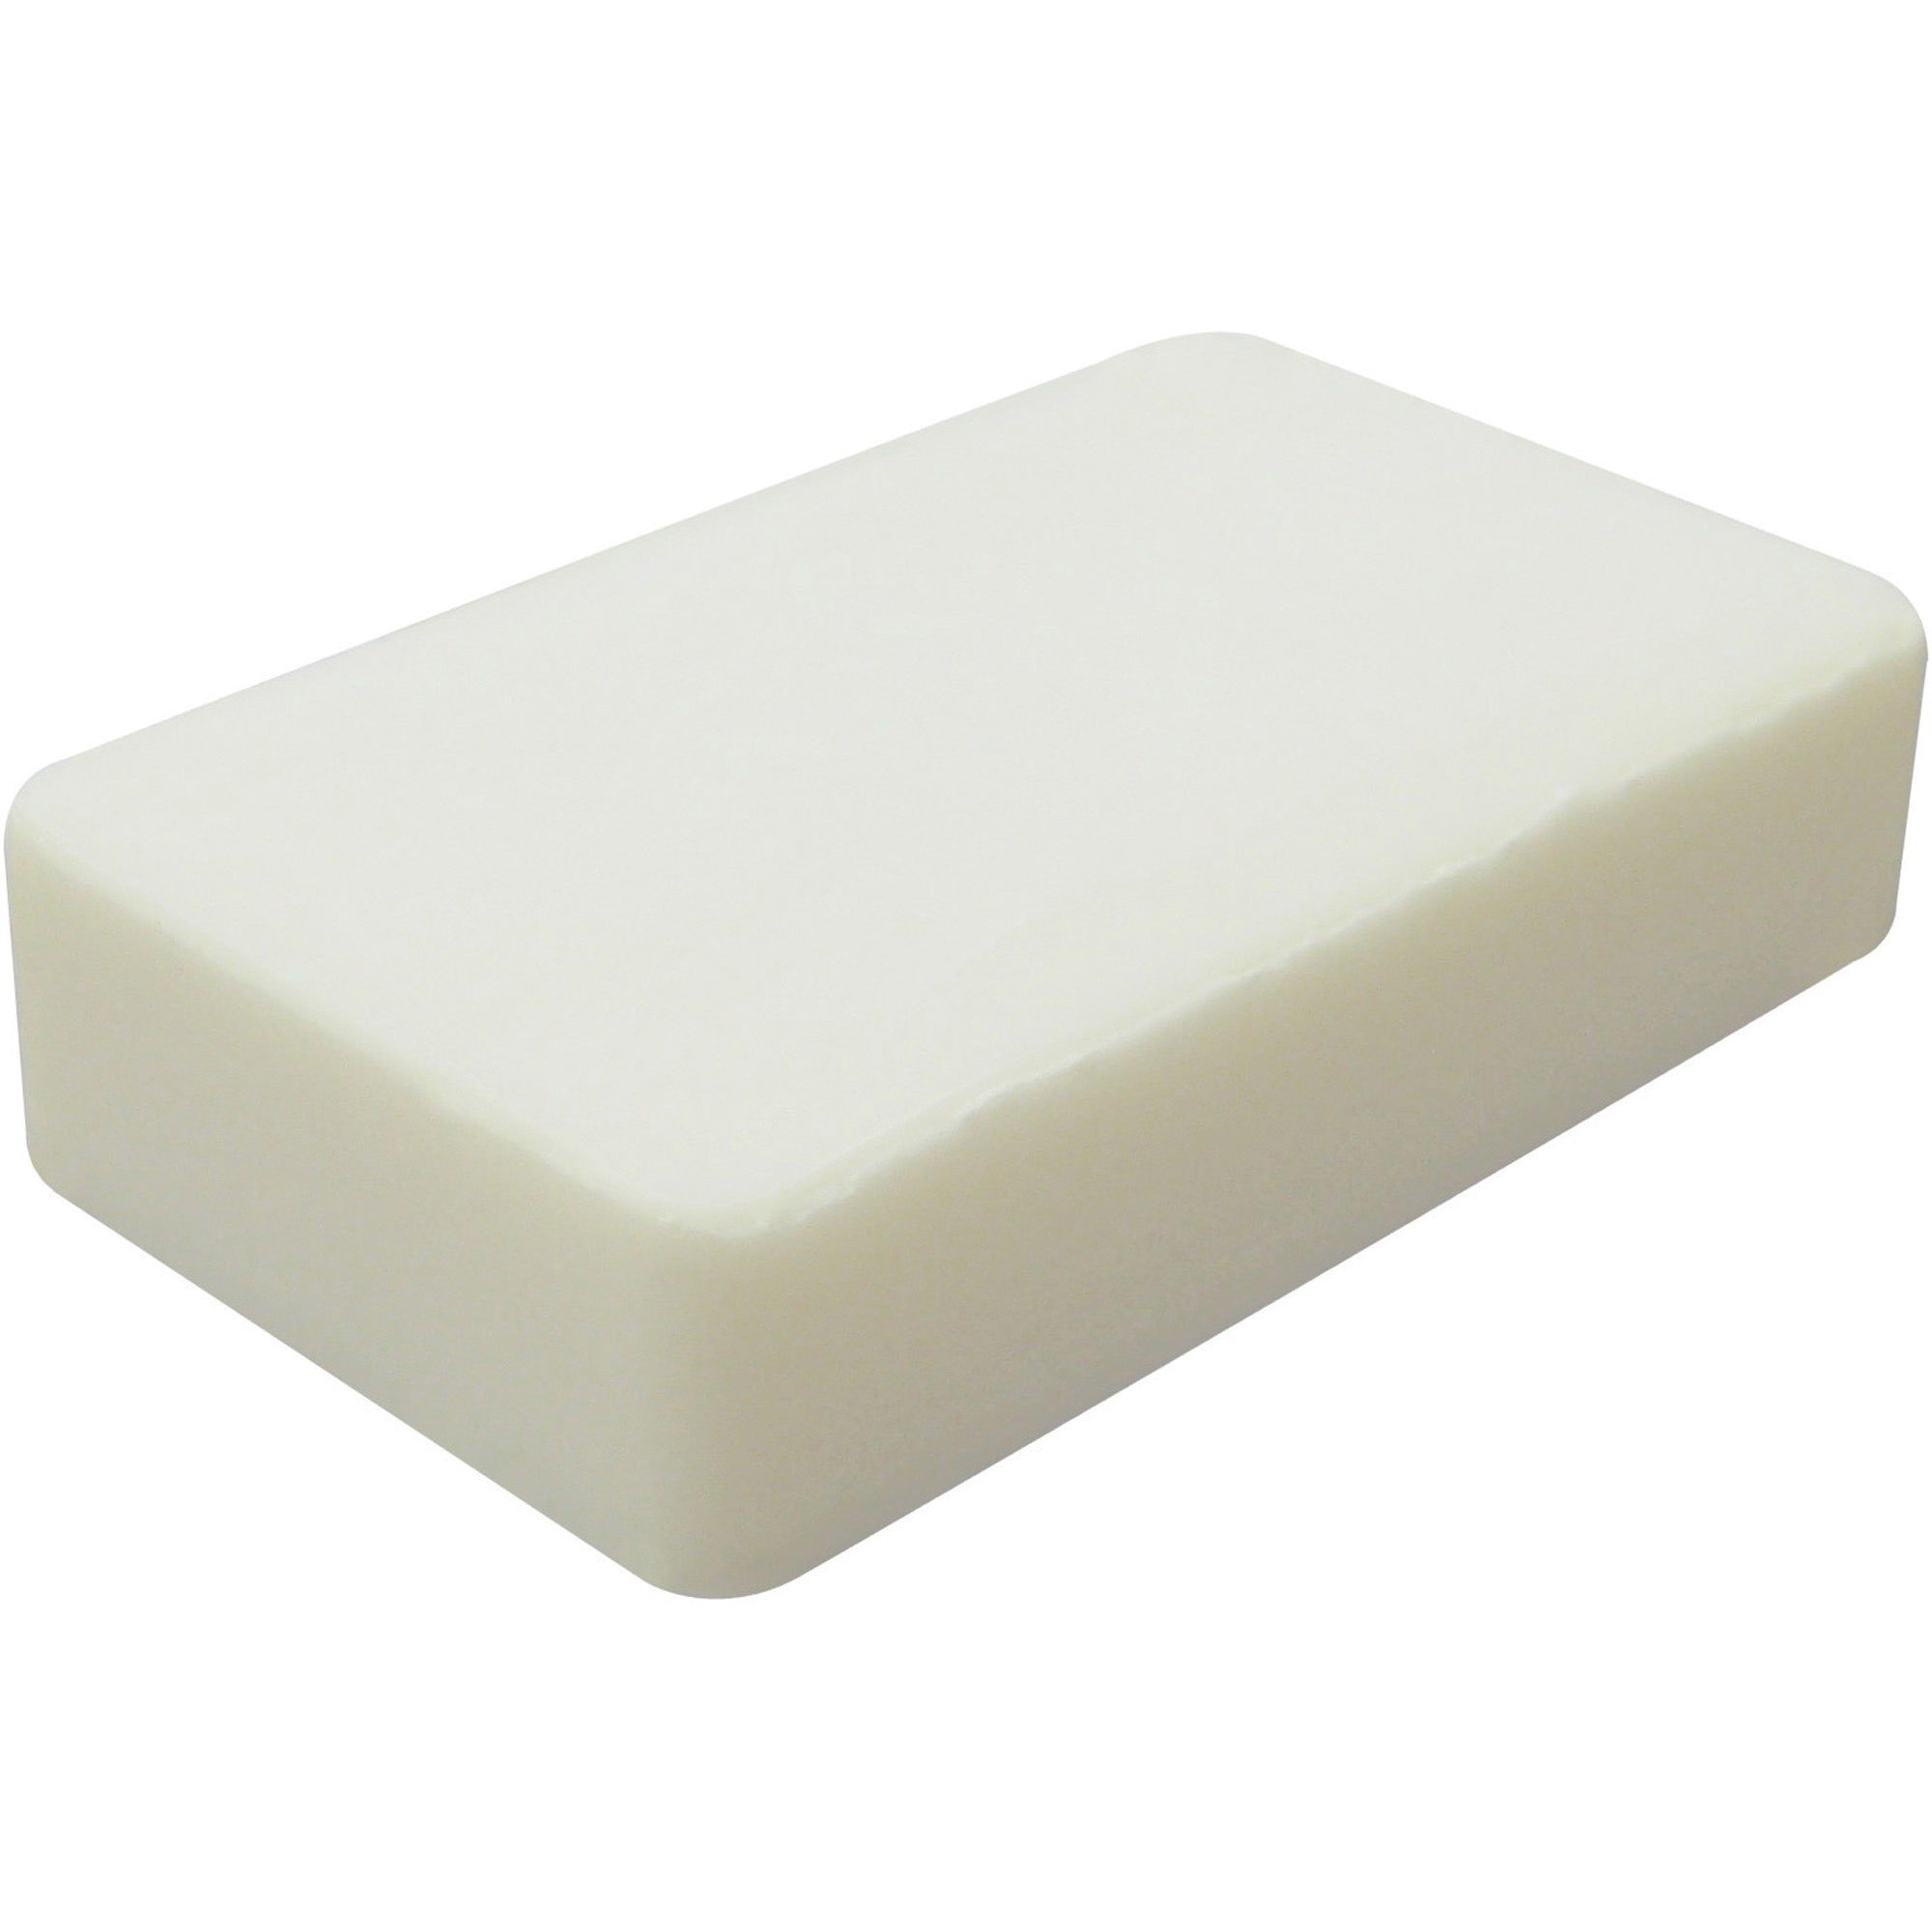 rdi-unwrapped-generic-soap-bars-hand-white-rich-lather-residue-free-100-carton_cfpspuw3 - 1